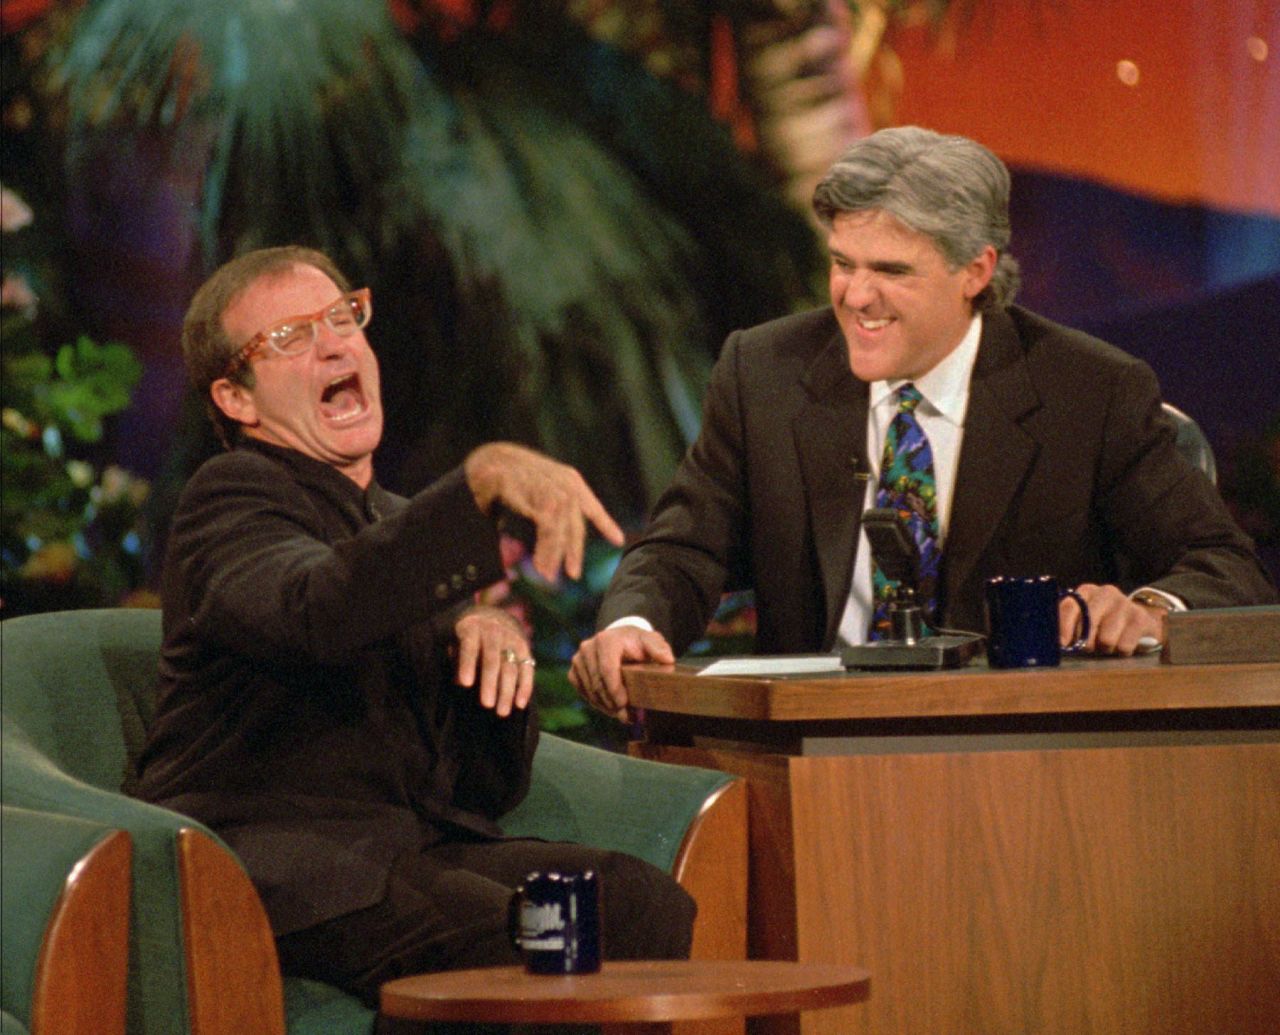 Jay Leno laughs as Williams jokes around during a taping of "The Tonight Show with Jay Leno" on November 13, 1995, at the MGM Grand Hotel in Las Vegas.